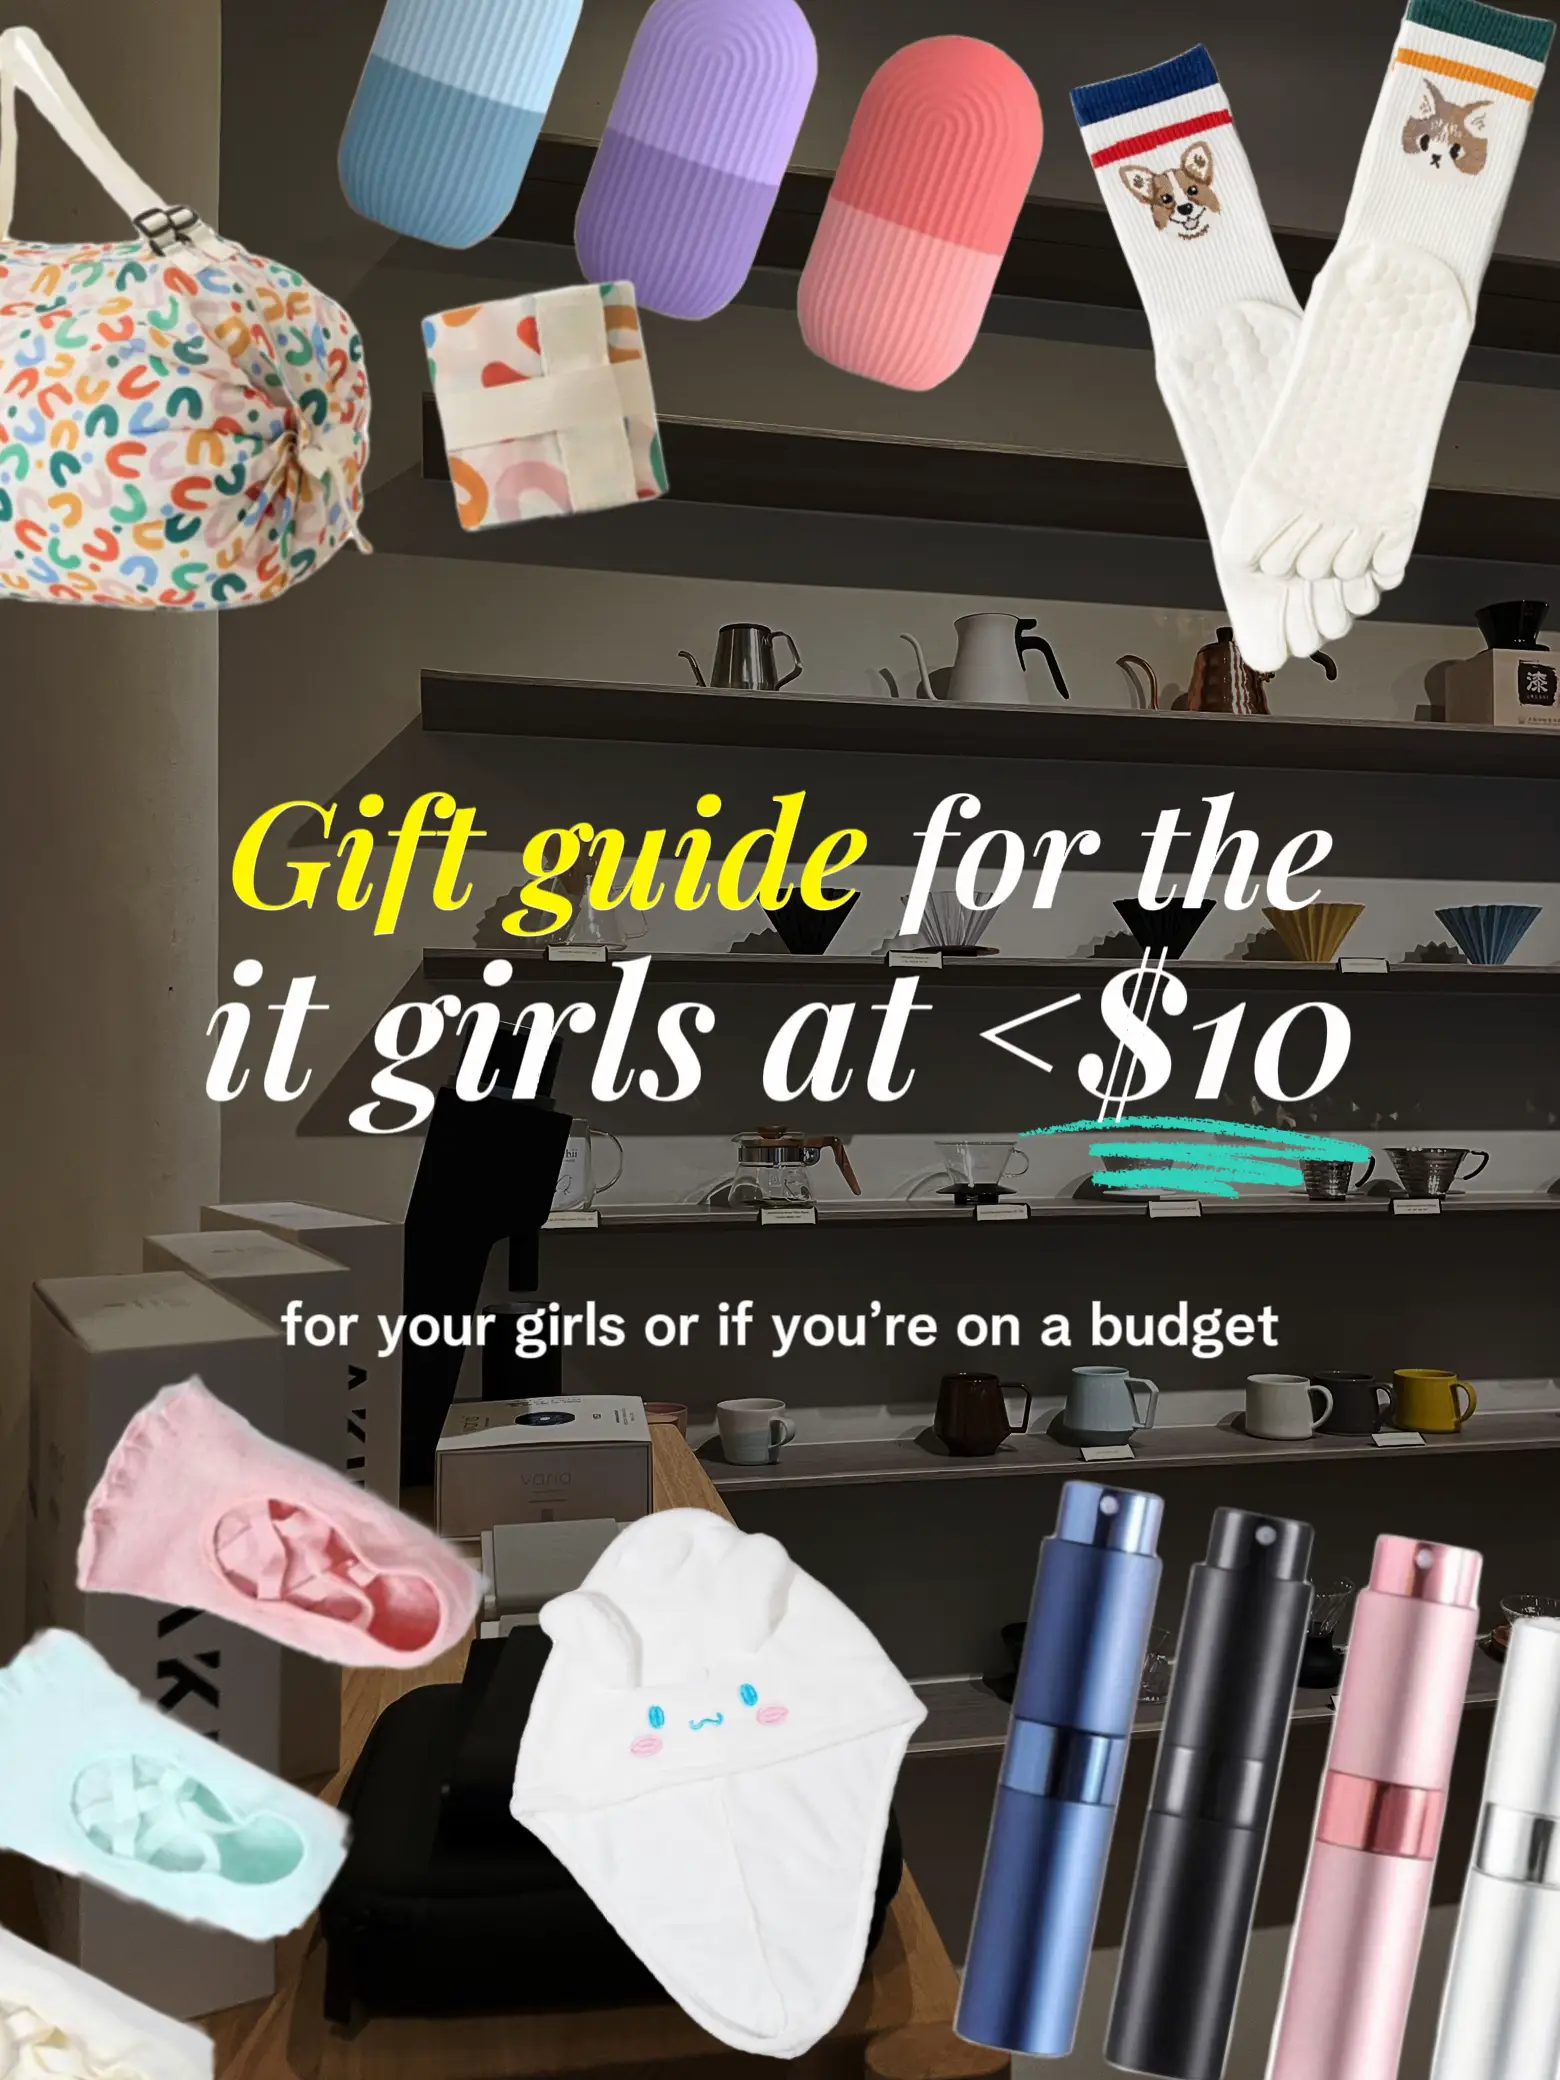 8 Gifts Under $25 They Won't Be Tempted to Regift